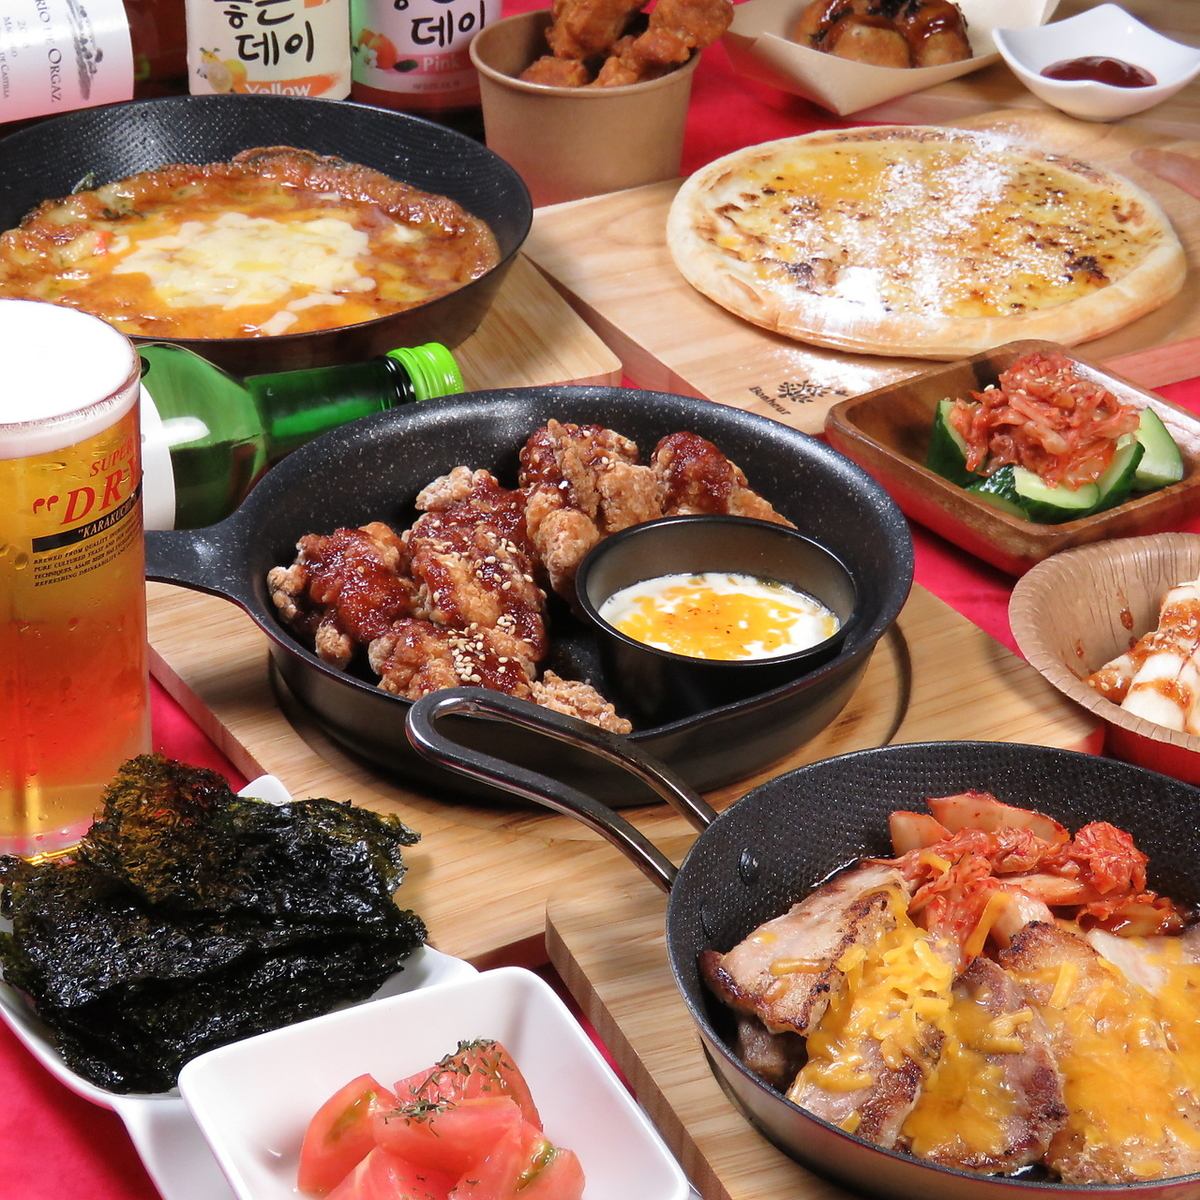 Up to 80 kinds of izakaya dishes are available at [All-you-can-eat]♪ All-you-can-eat plans available from 2500 yen!